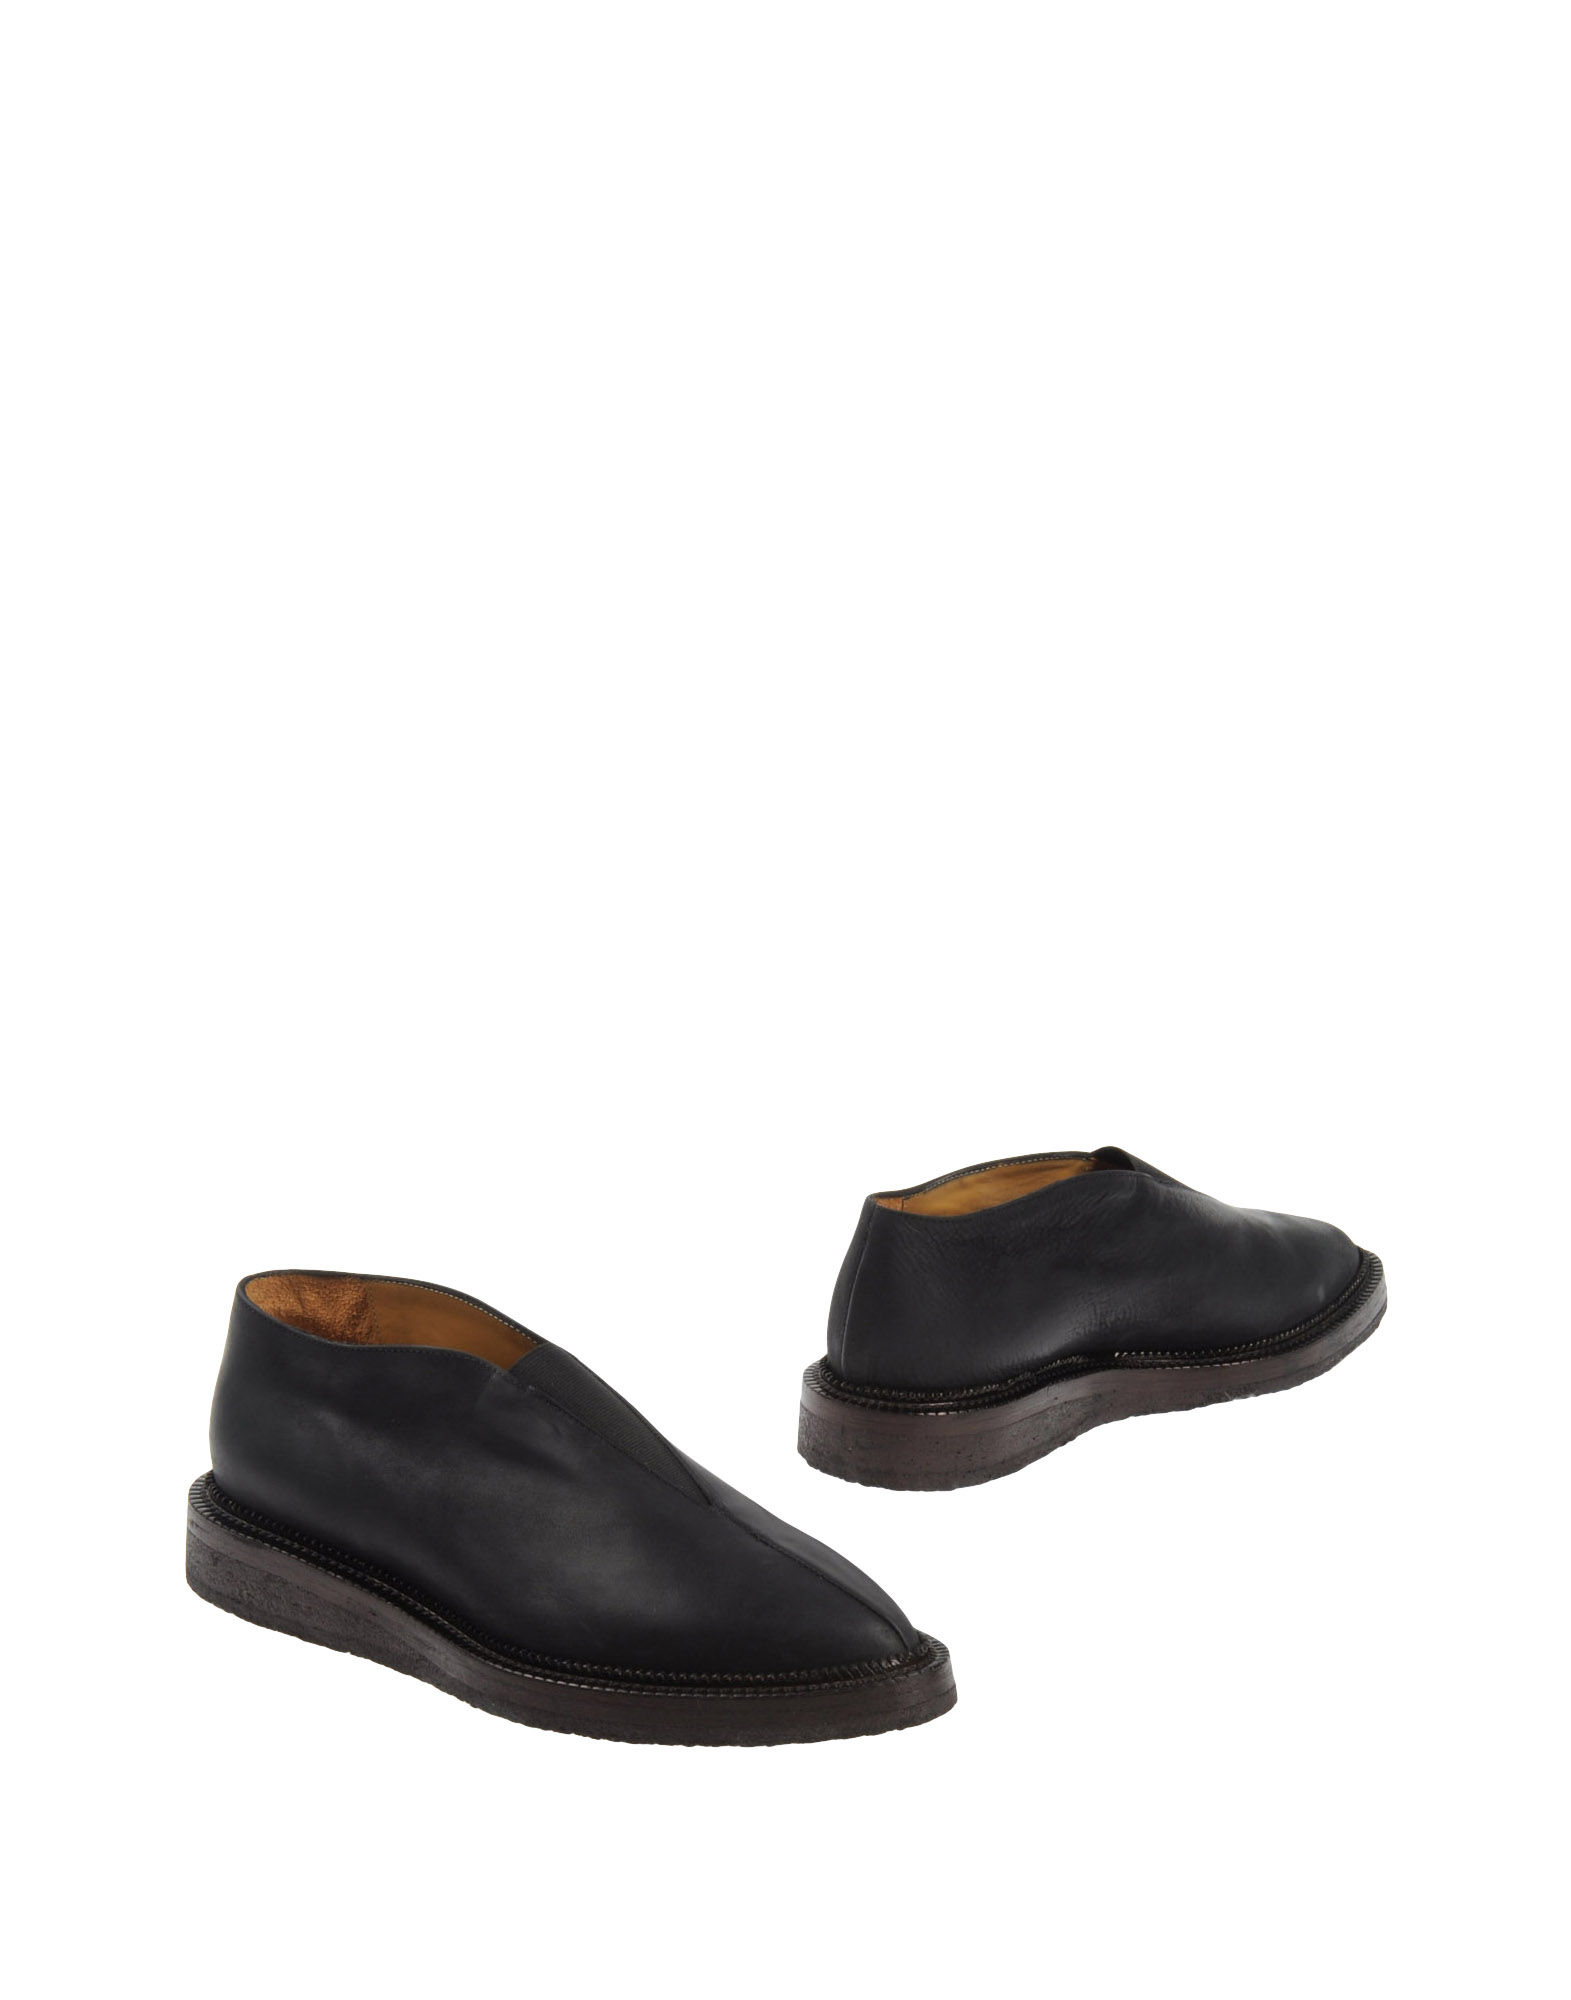 Damir Doma Shoe Boots in Black | Lyst